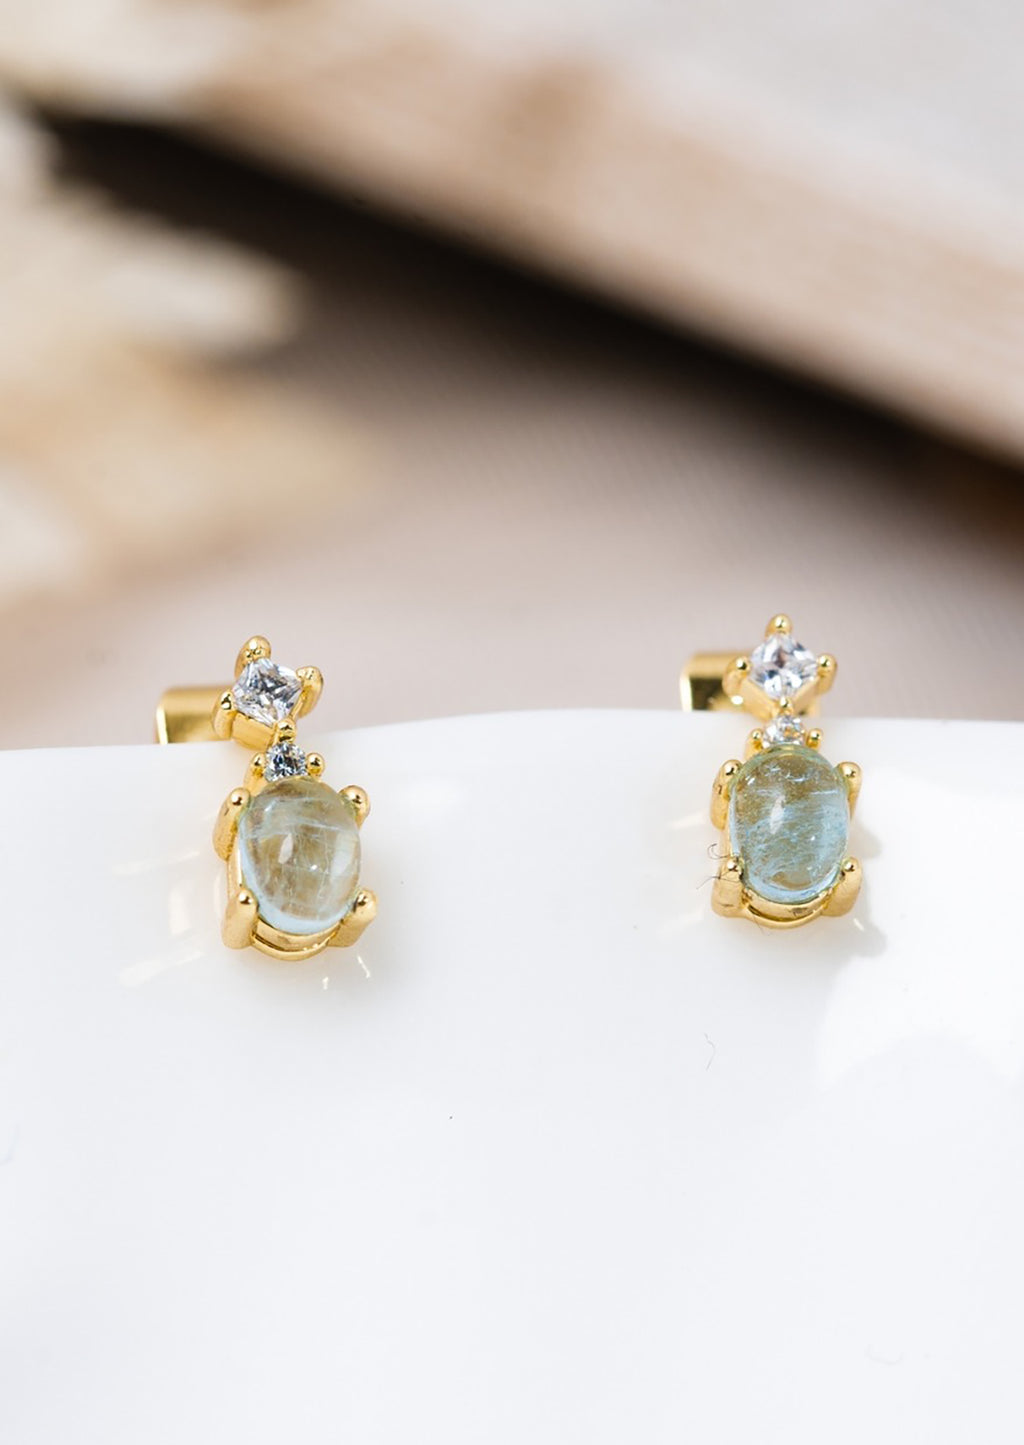 Large: A pair of bigger aquamarine stud earrings in gold with crystal detail.